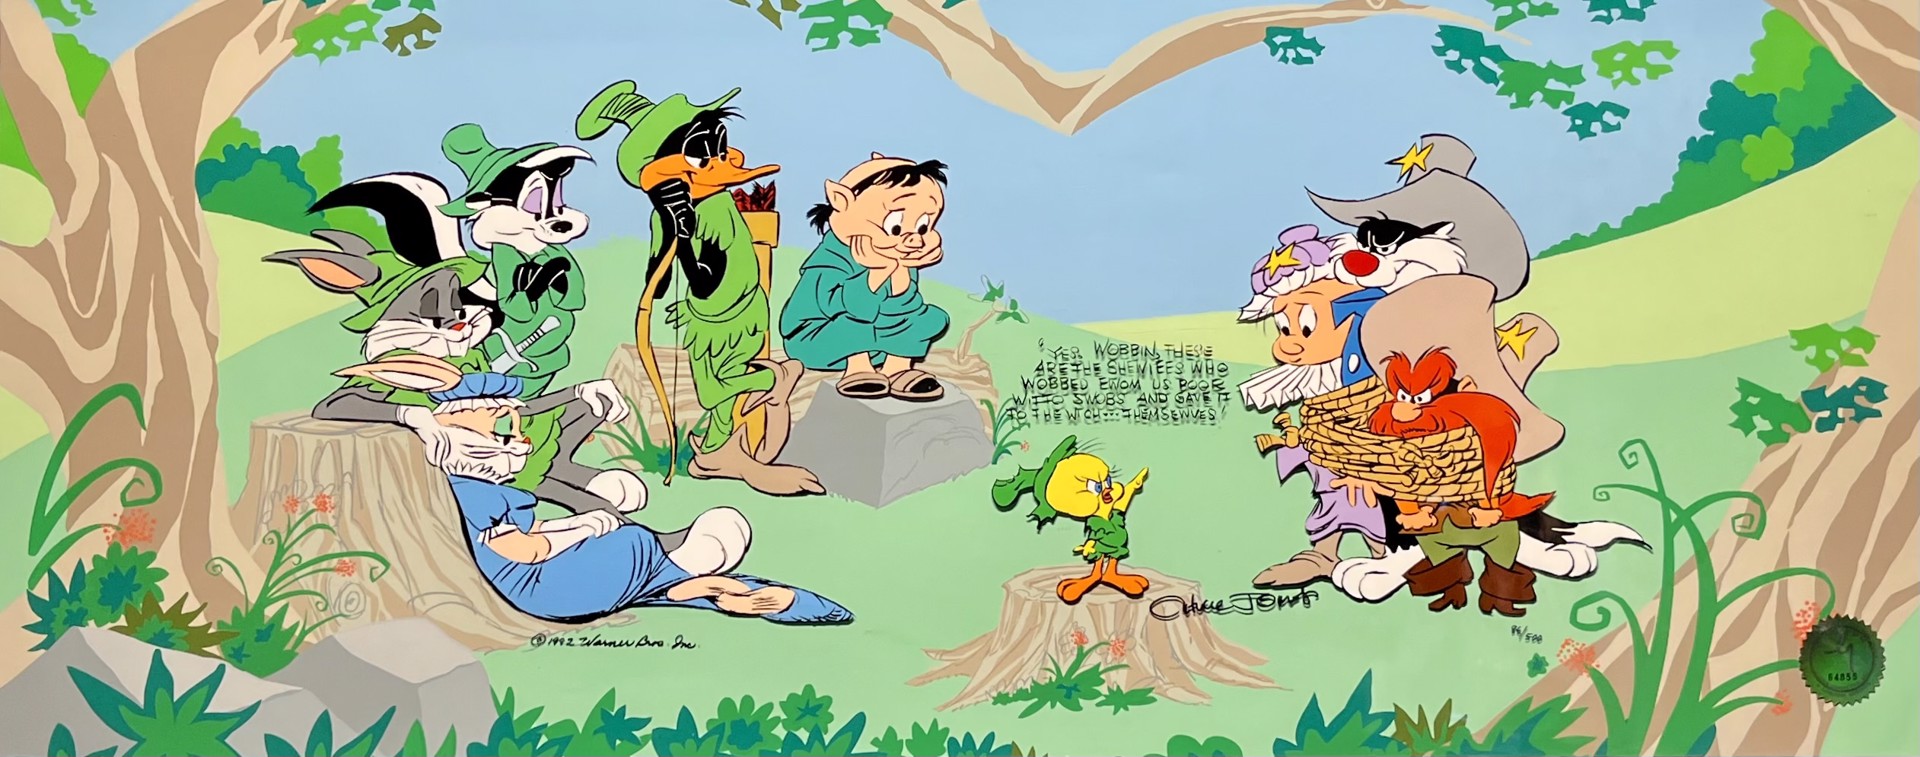 Sherwood Forest Group by Chuck Jones